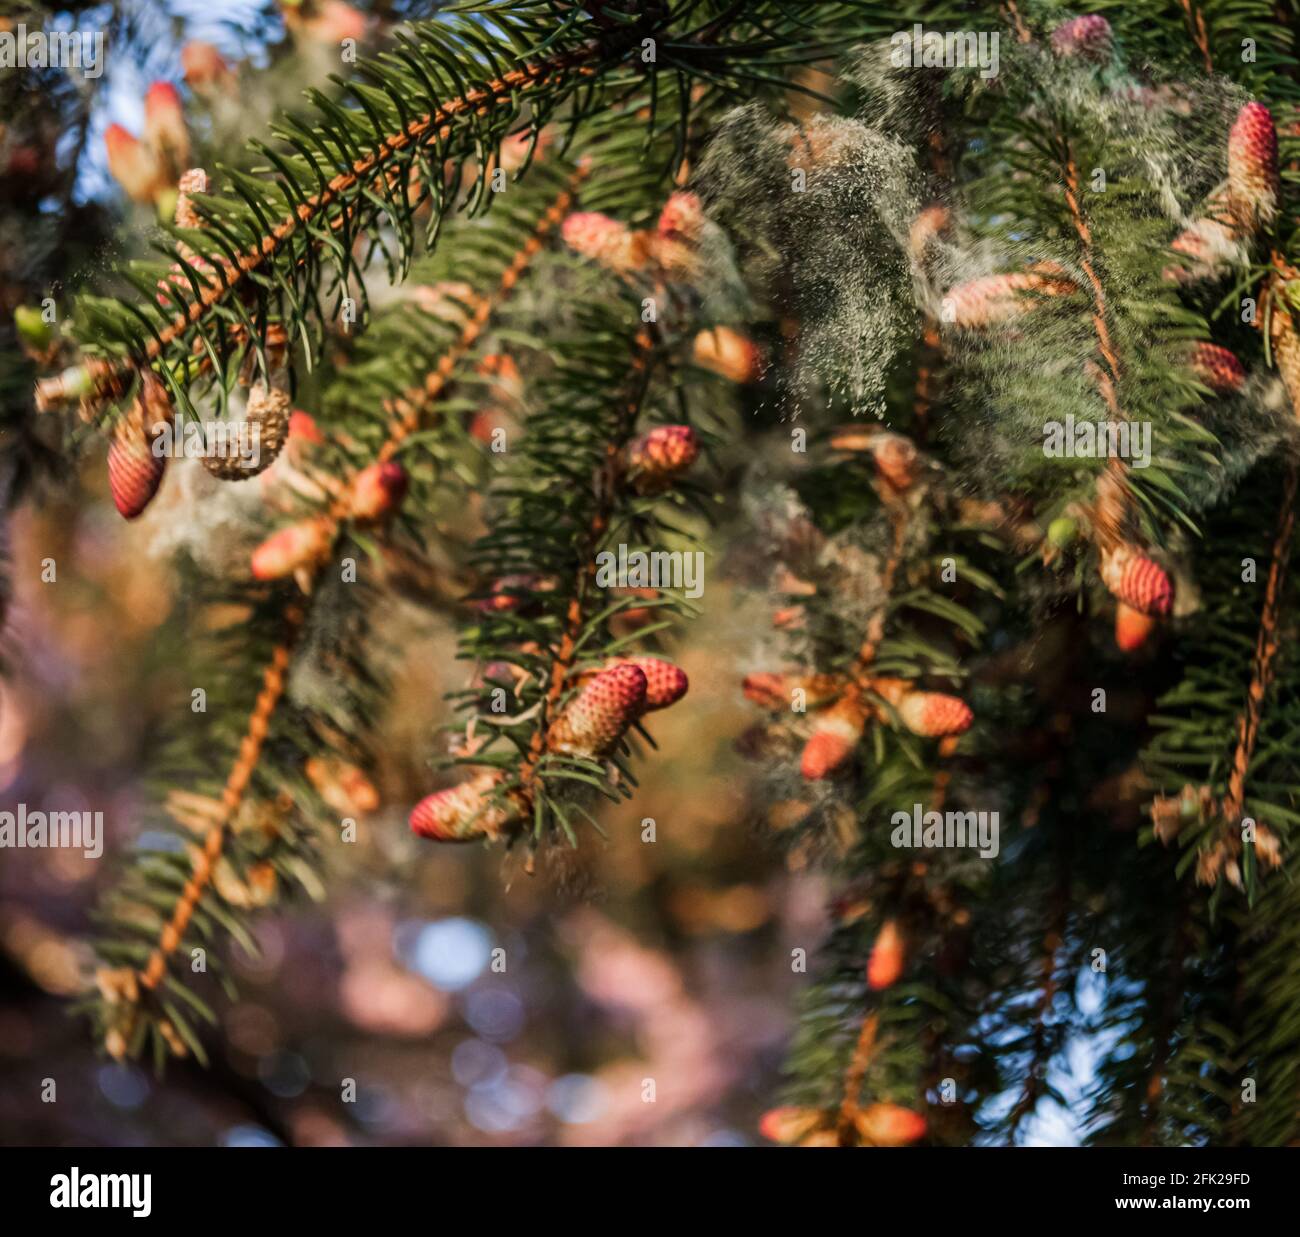 Norway Spruce, Picea abies Acrocona, Releasing Pollen from its Small Red Cones on its Branch Tips in Lancaster County, Pennsylvania During Spring Stock Photo